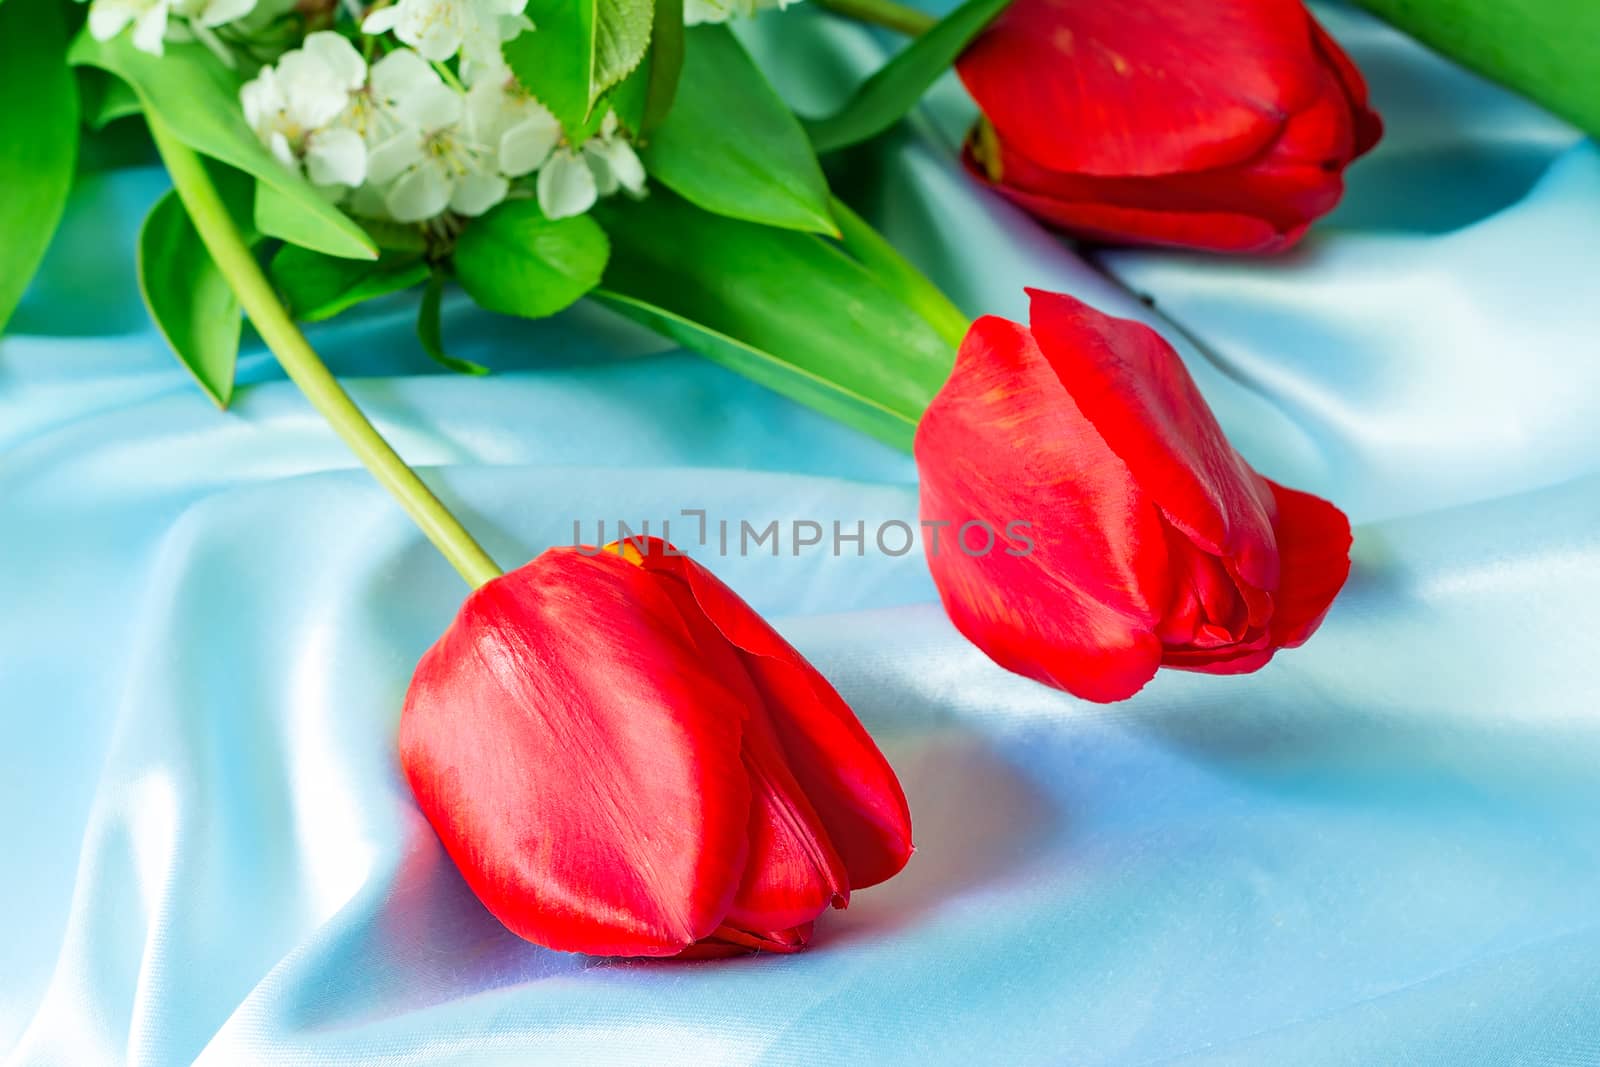 Three big beautiful tulips of bright red color with green leaves against blue silk